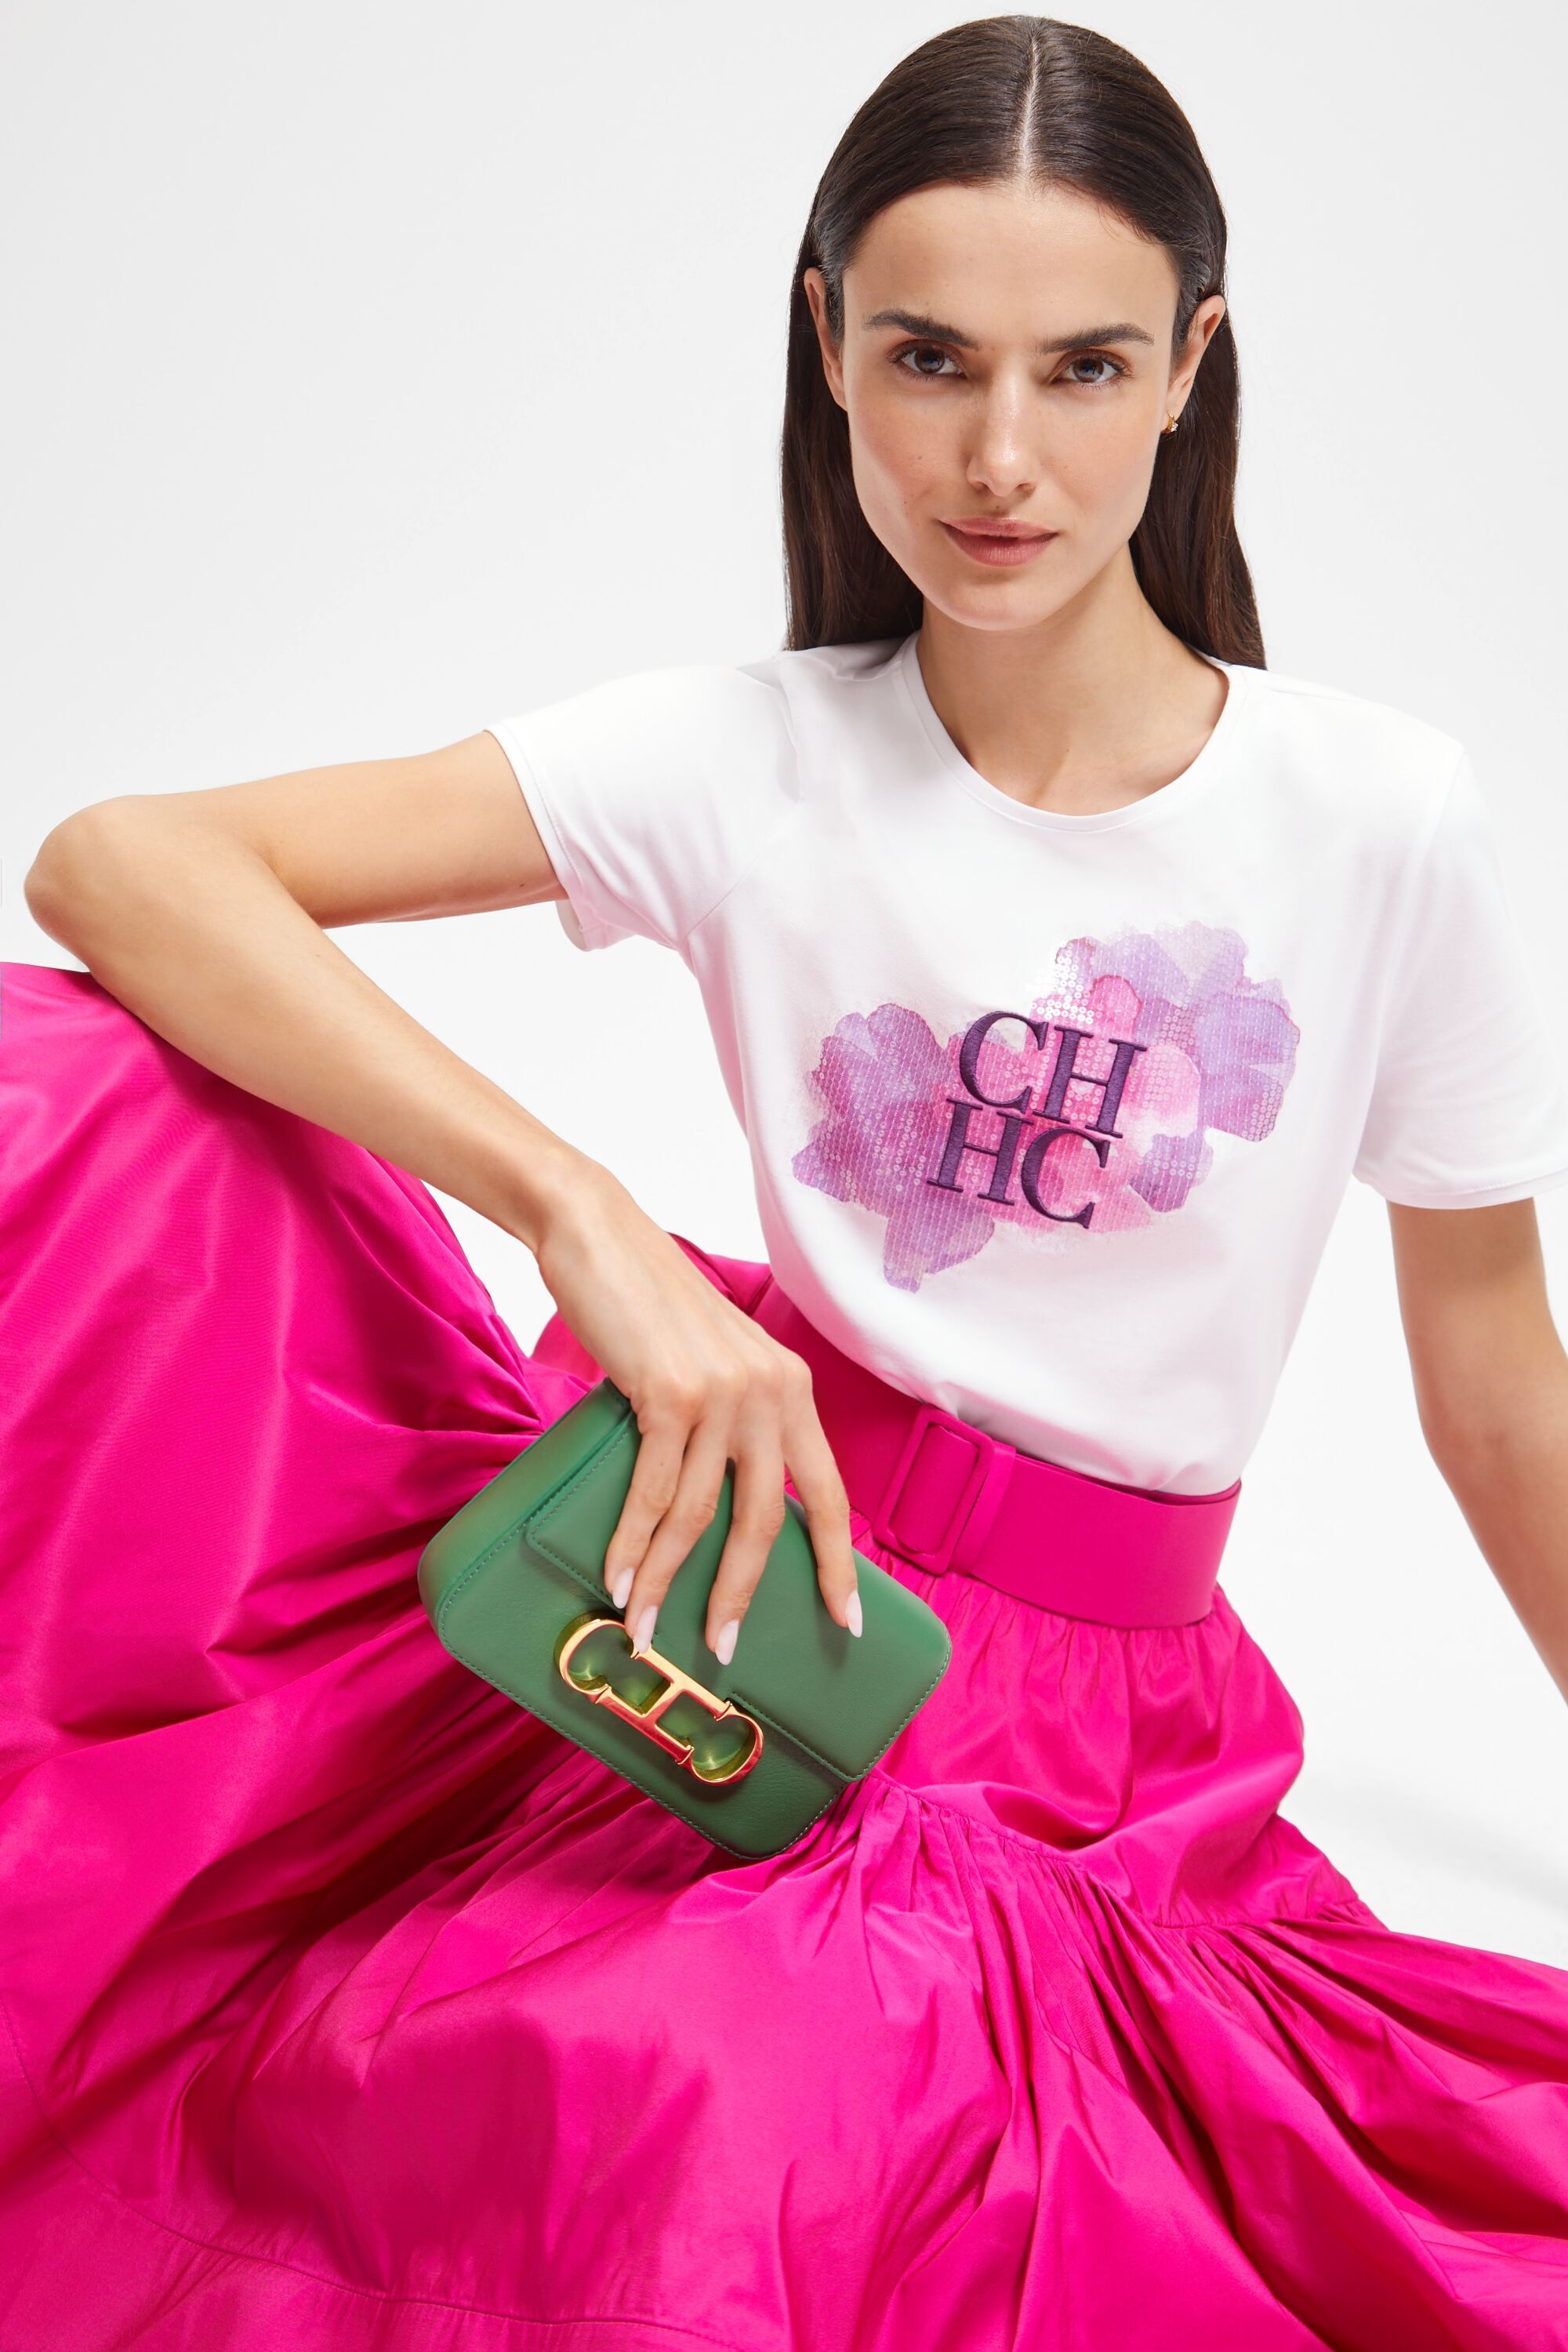 CH t-shirt with sequin-embellished flowers